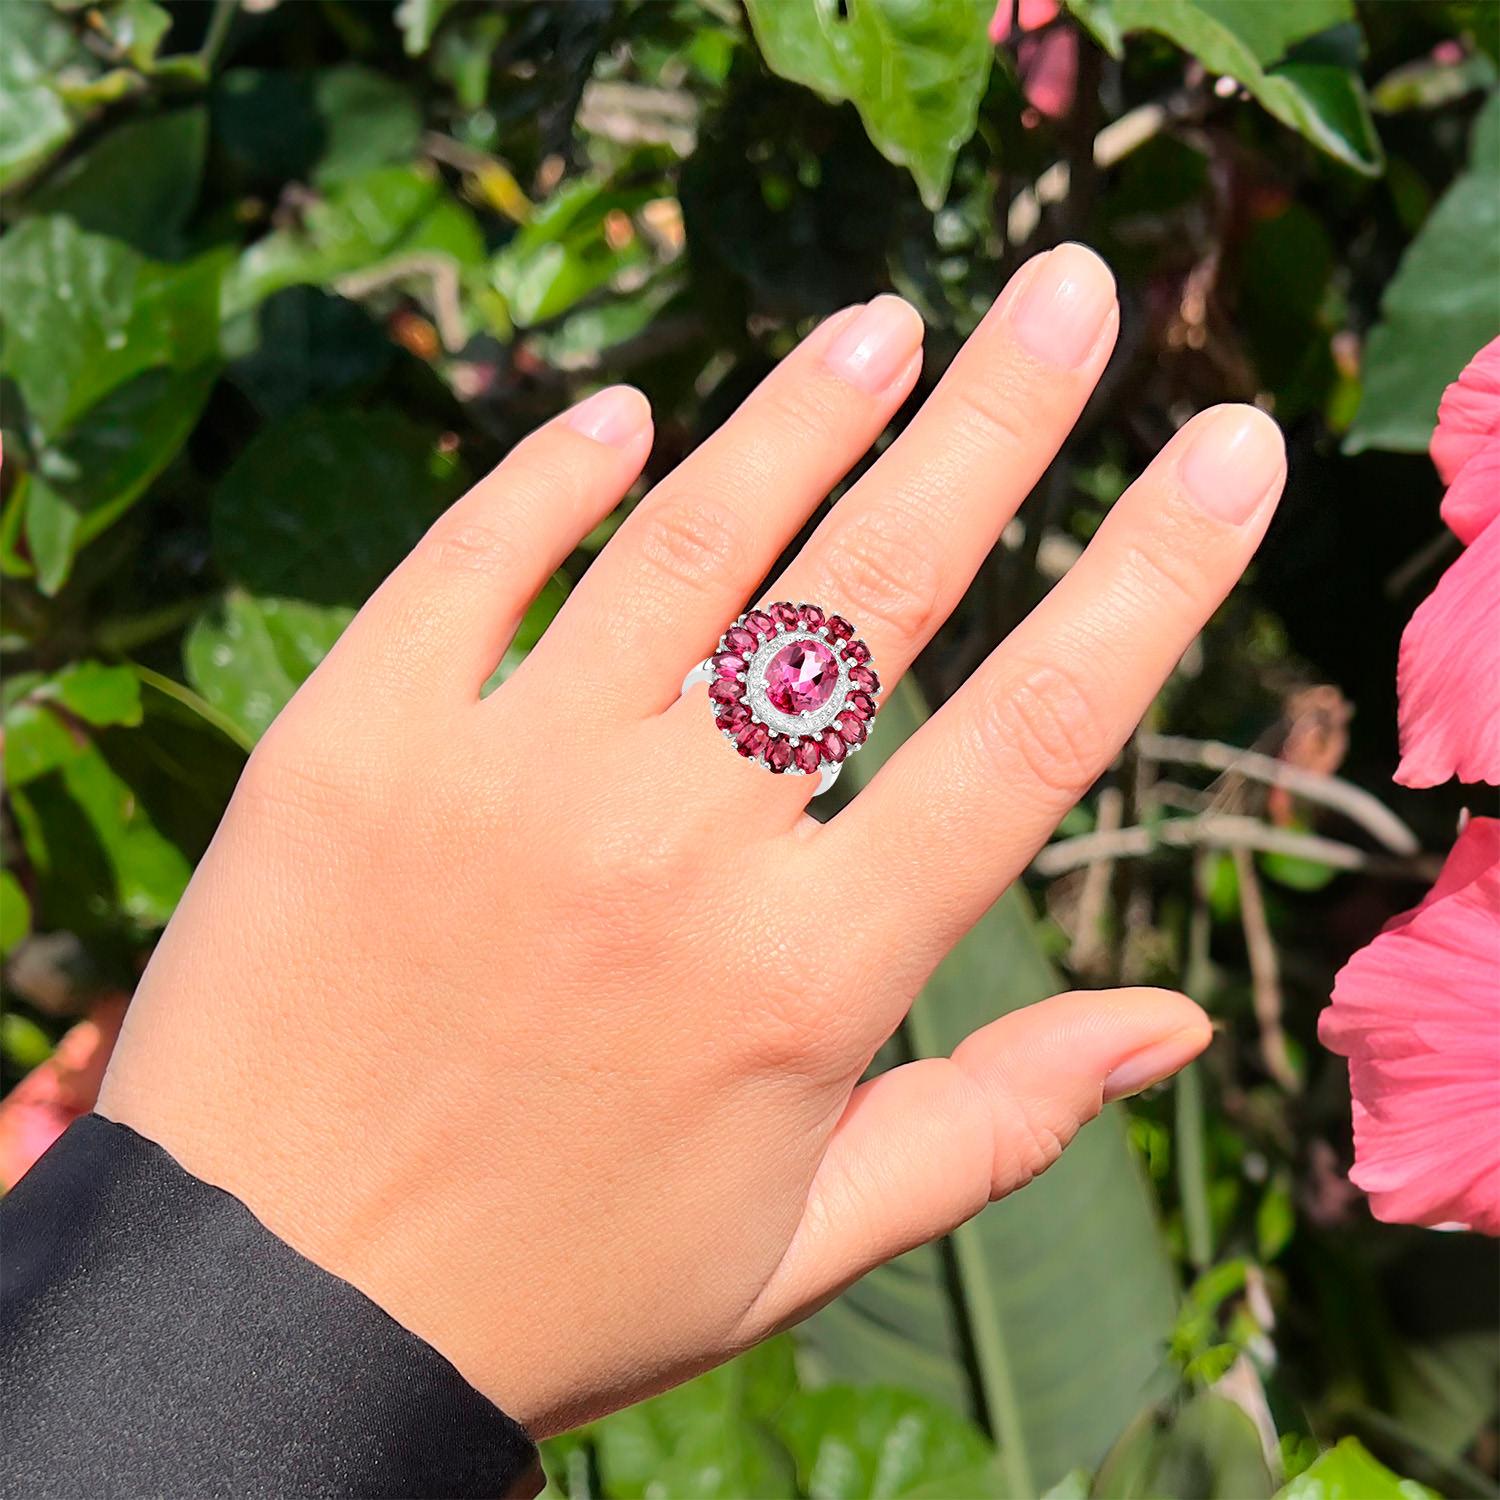 Oval Cut Pink Topaz Flower Cocktail Ring Rhodolite Halo 5.5 Carats For Sale